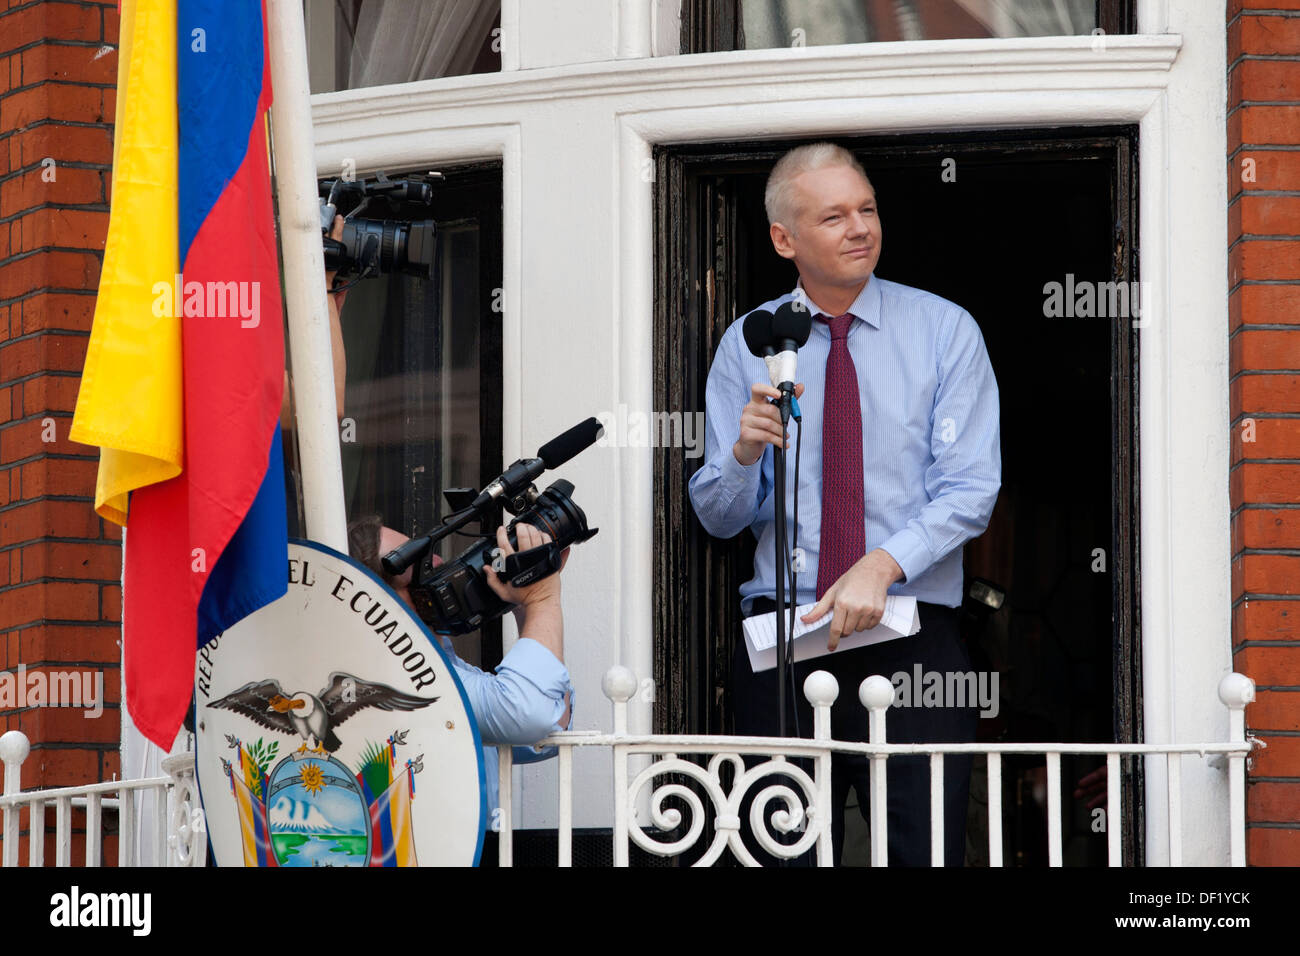 Julian Assange addresses the media and supporters while British policemen stand outside the Ecuadorian Embassy in London, Britai Stock Photo